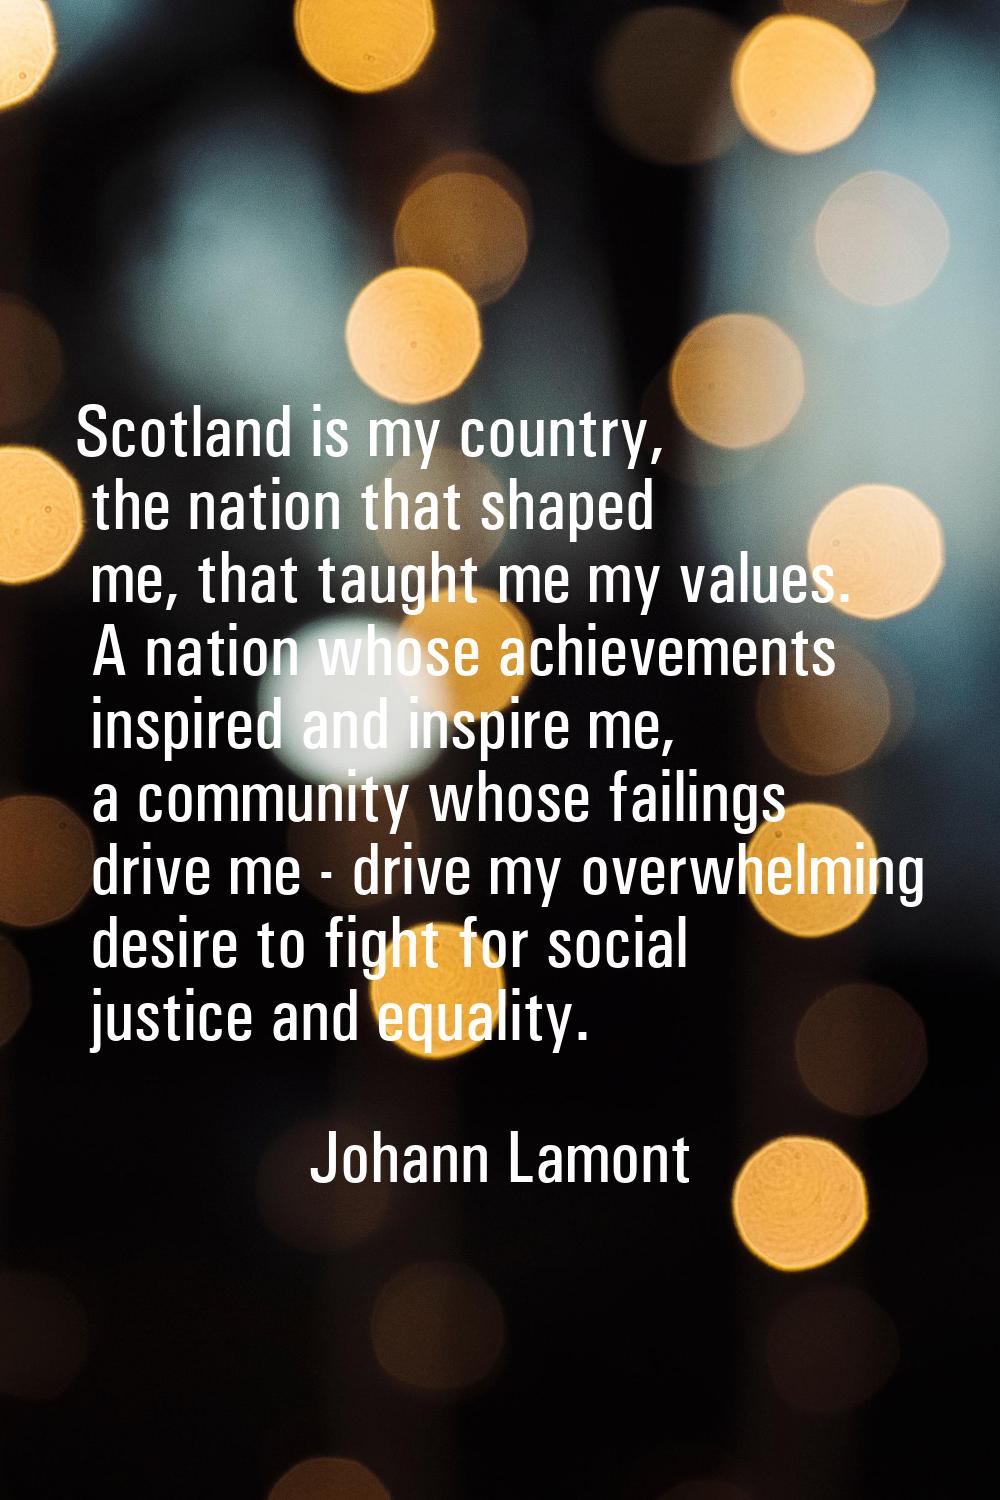 Scotland is my country, the nation that shaped me, that taught me my values. A nation whose achieve